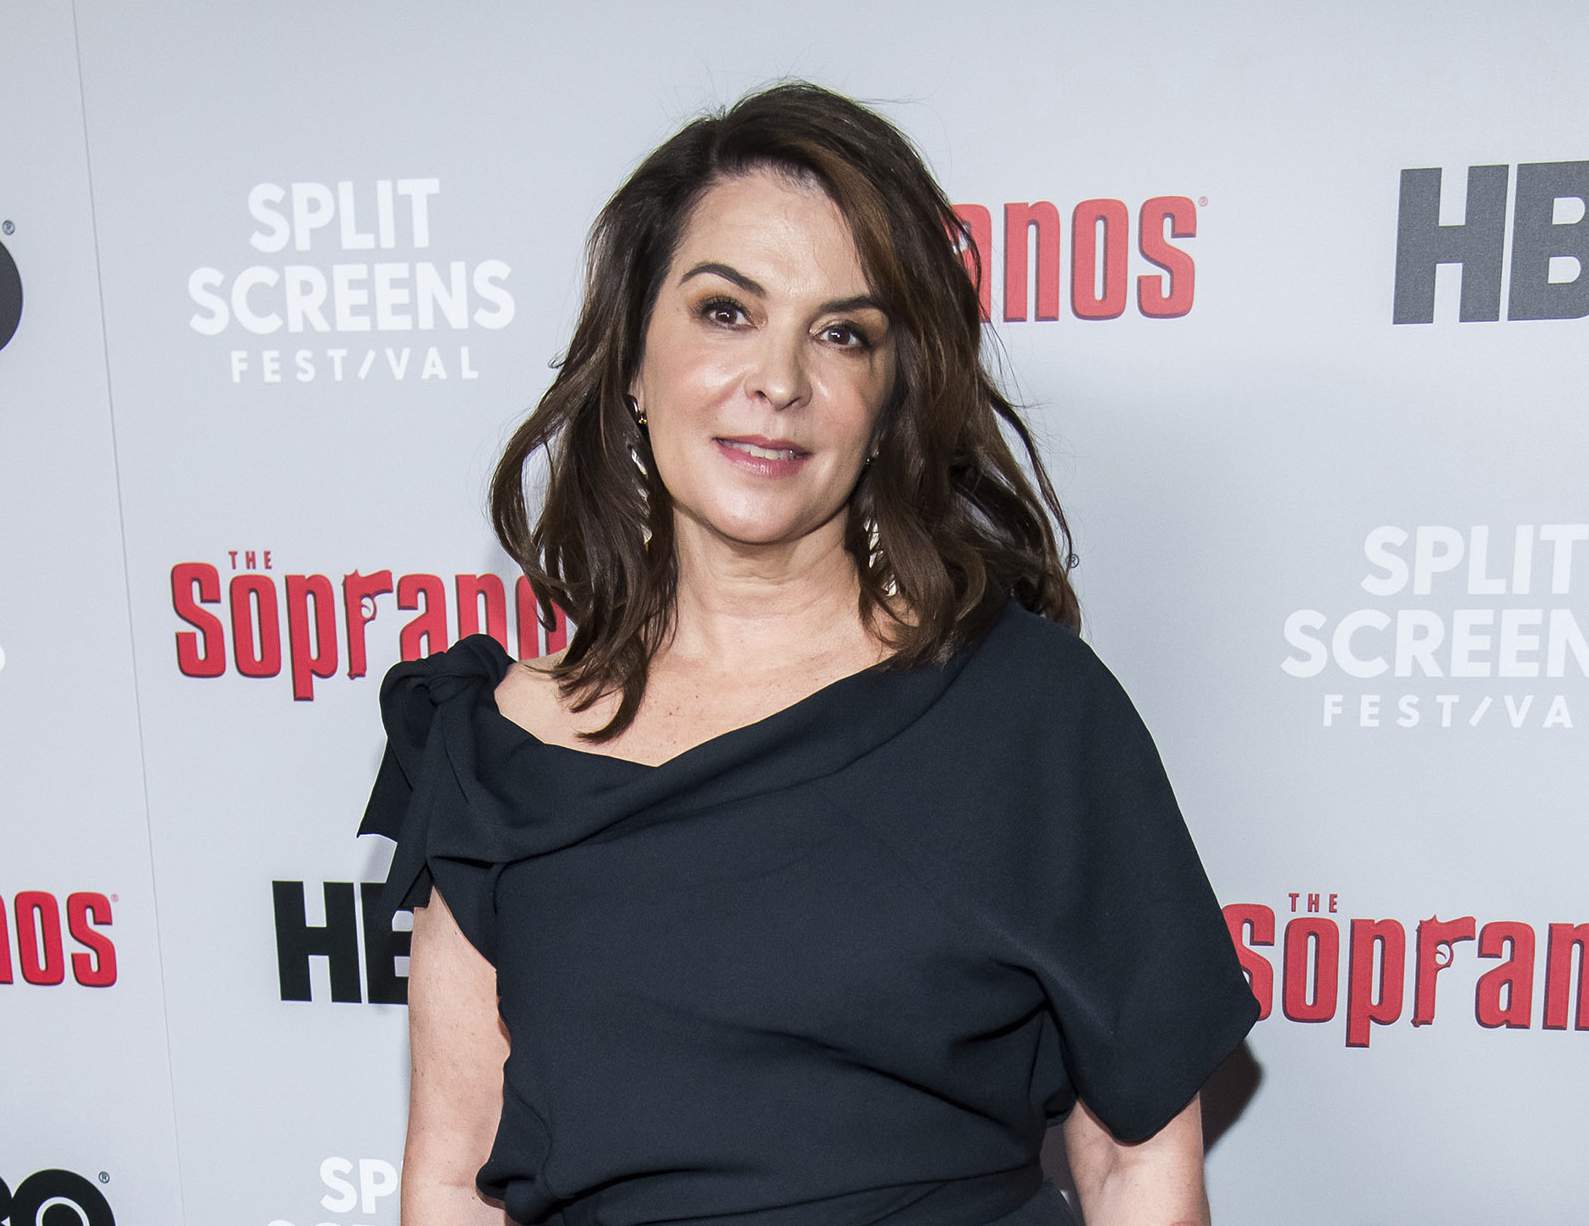 'Sopranos' actress says Weinstein raped her in the mid-1990s1589 x 1226